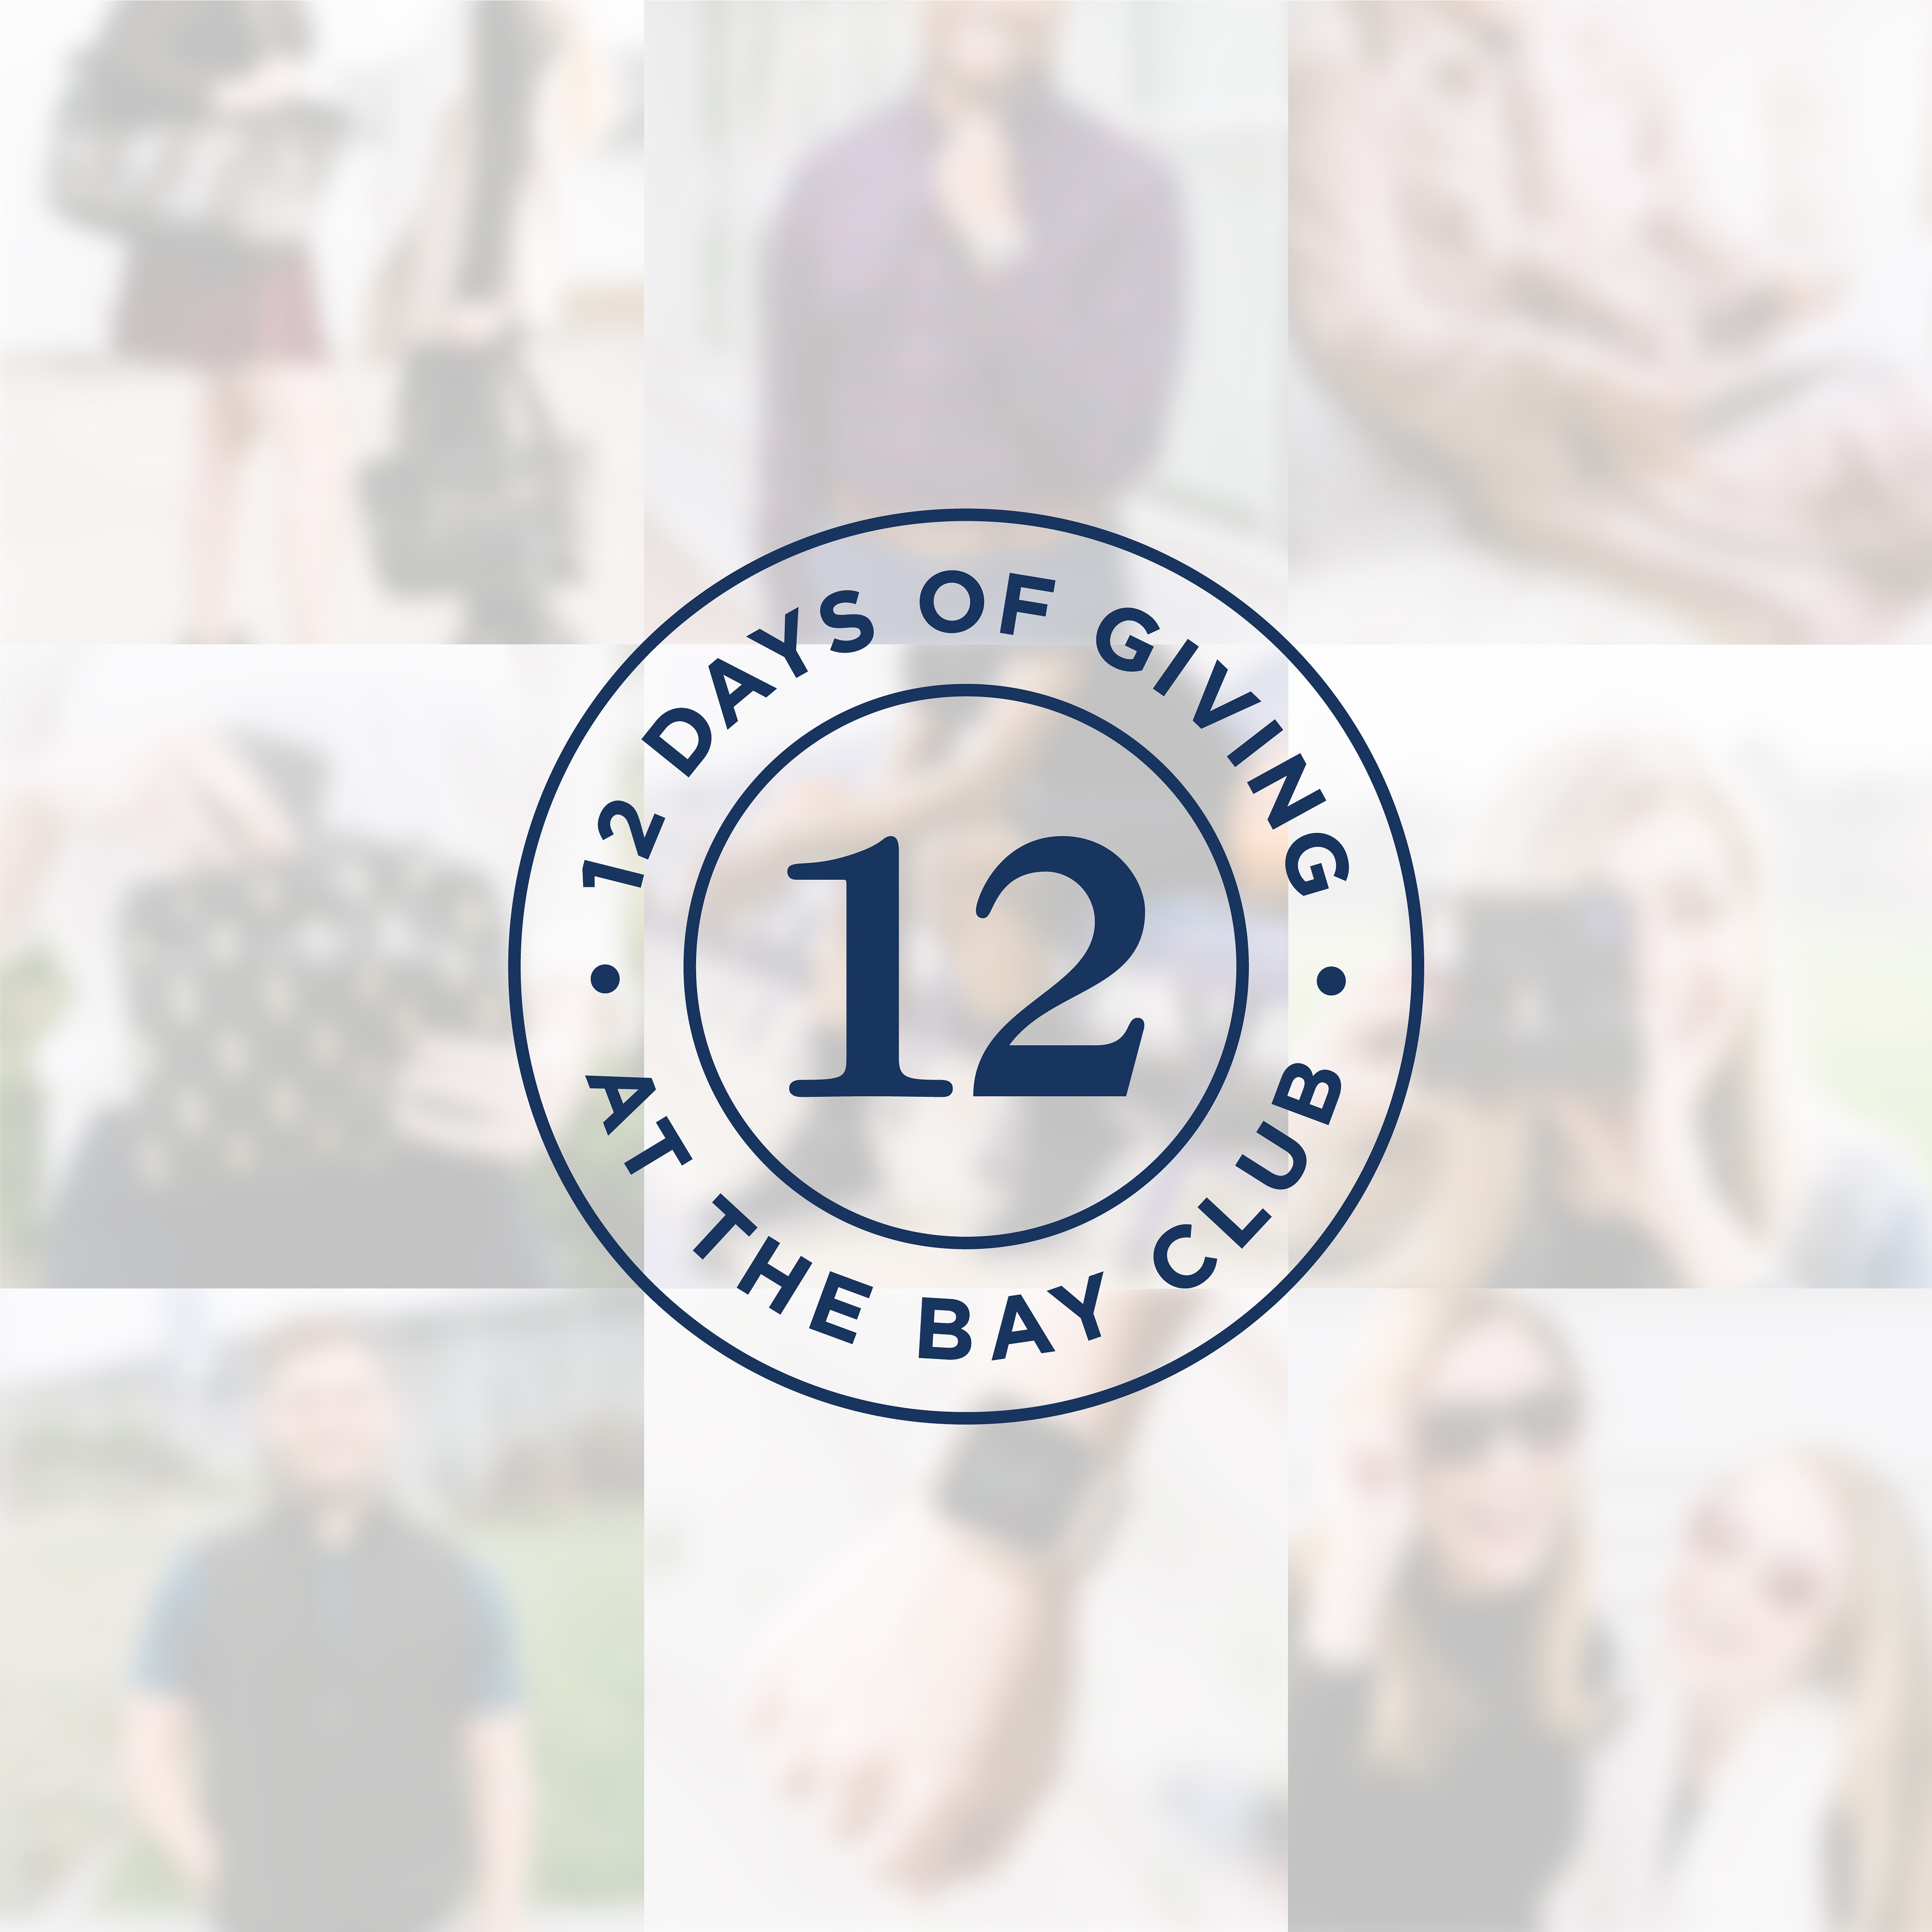 The 12 Days of Giving